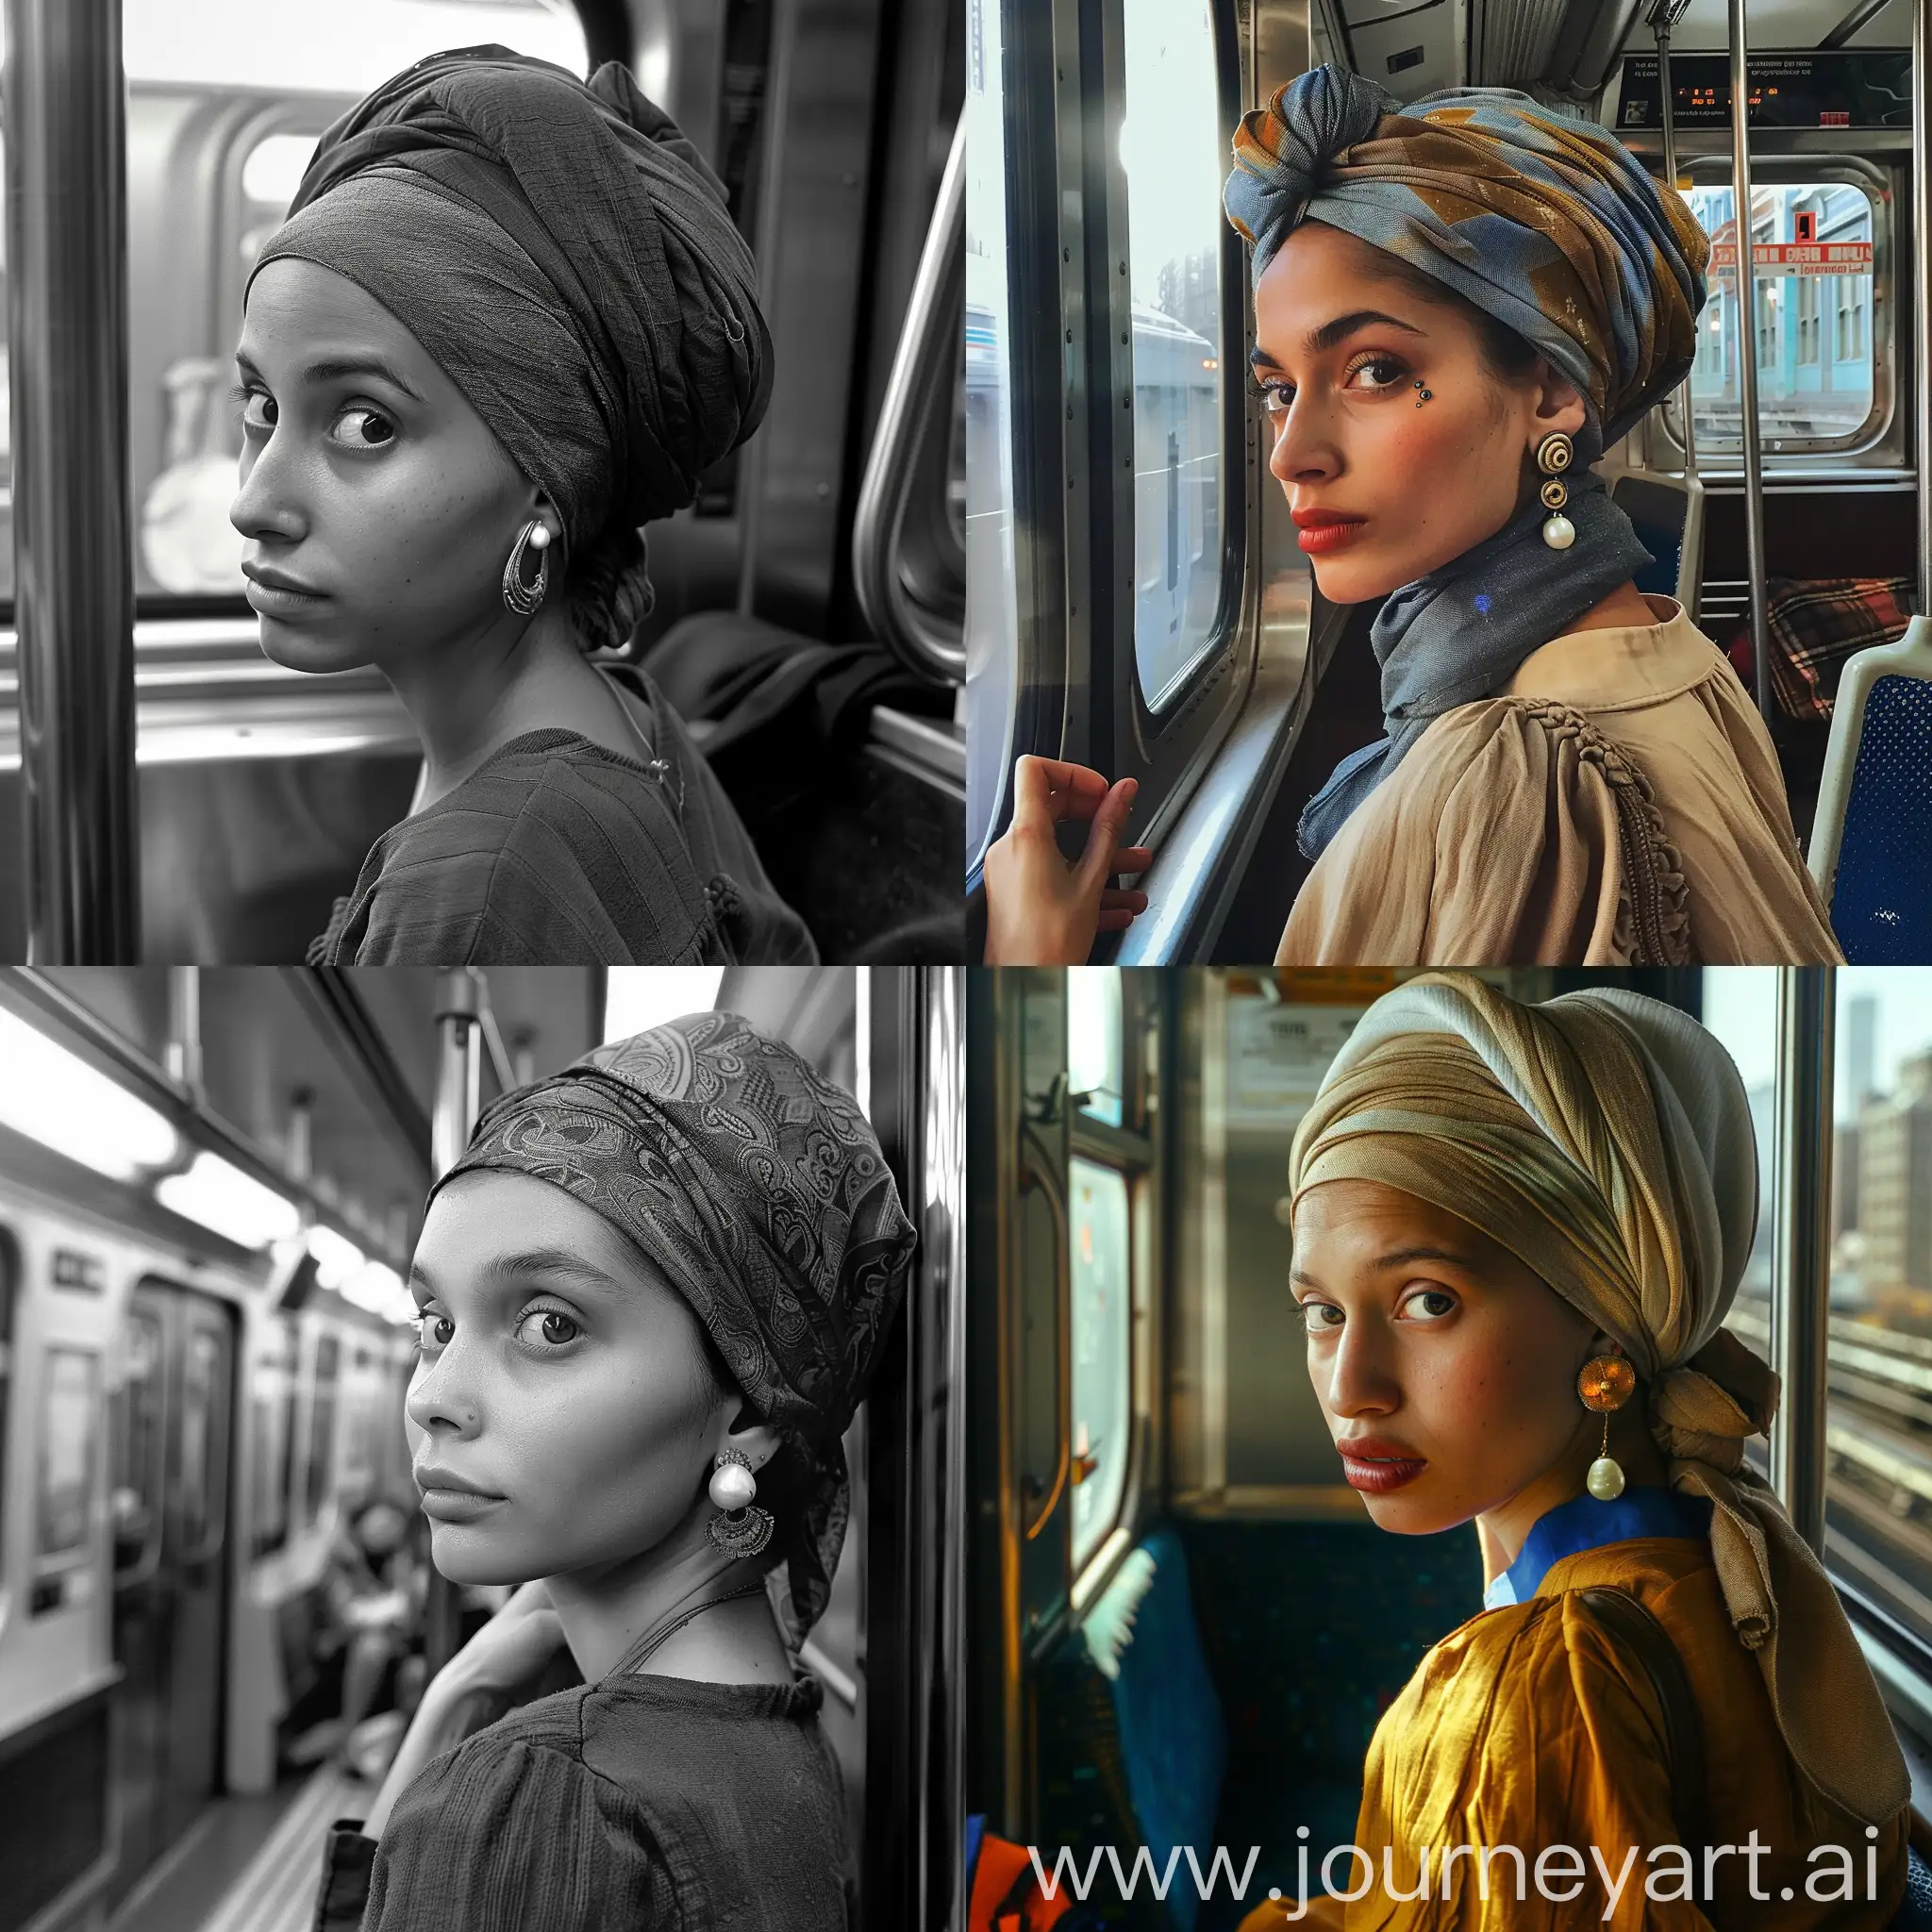 Contemplative-Subway-Commuter-with-Unique-Earring-and-Head-Wrap